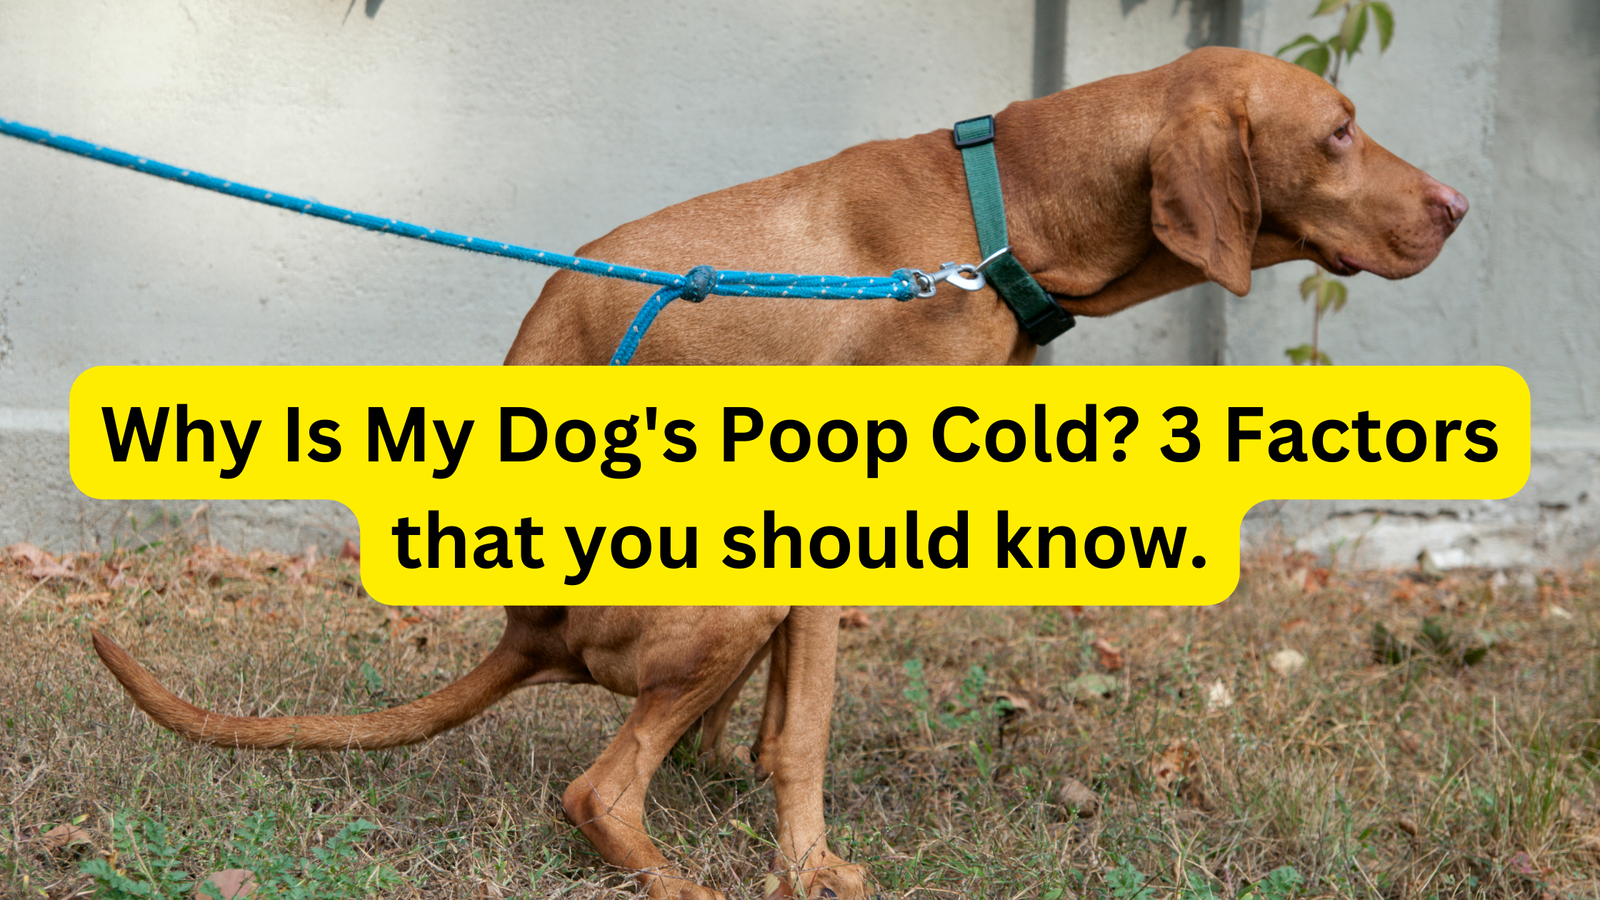 Why Is My Dog's Poop Cold